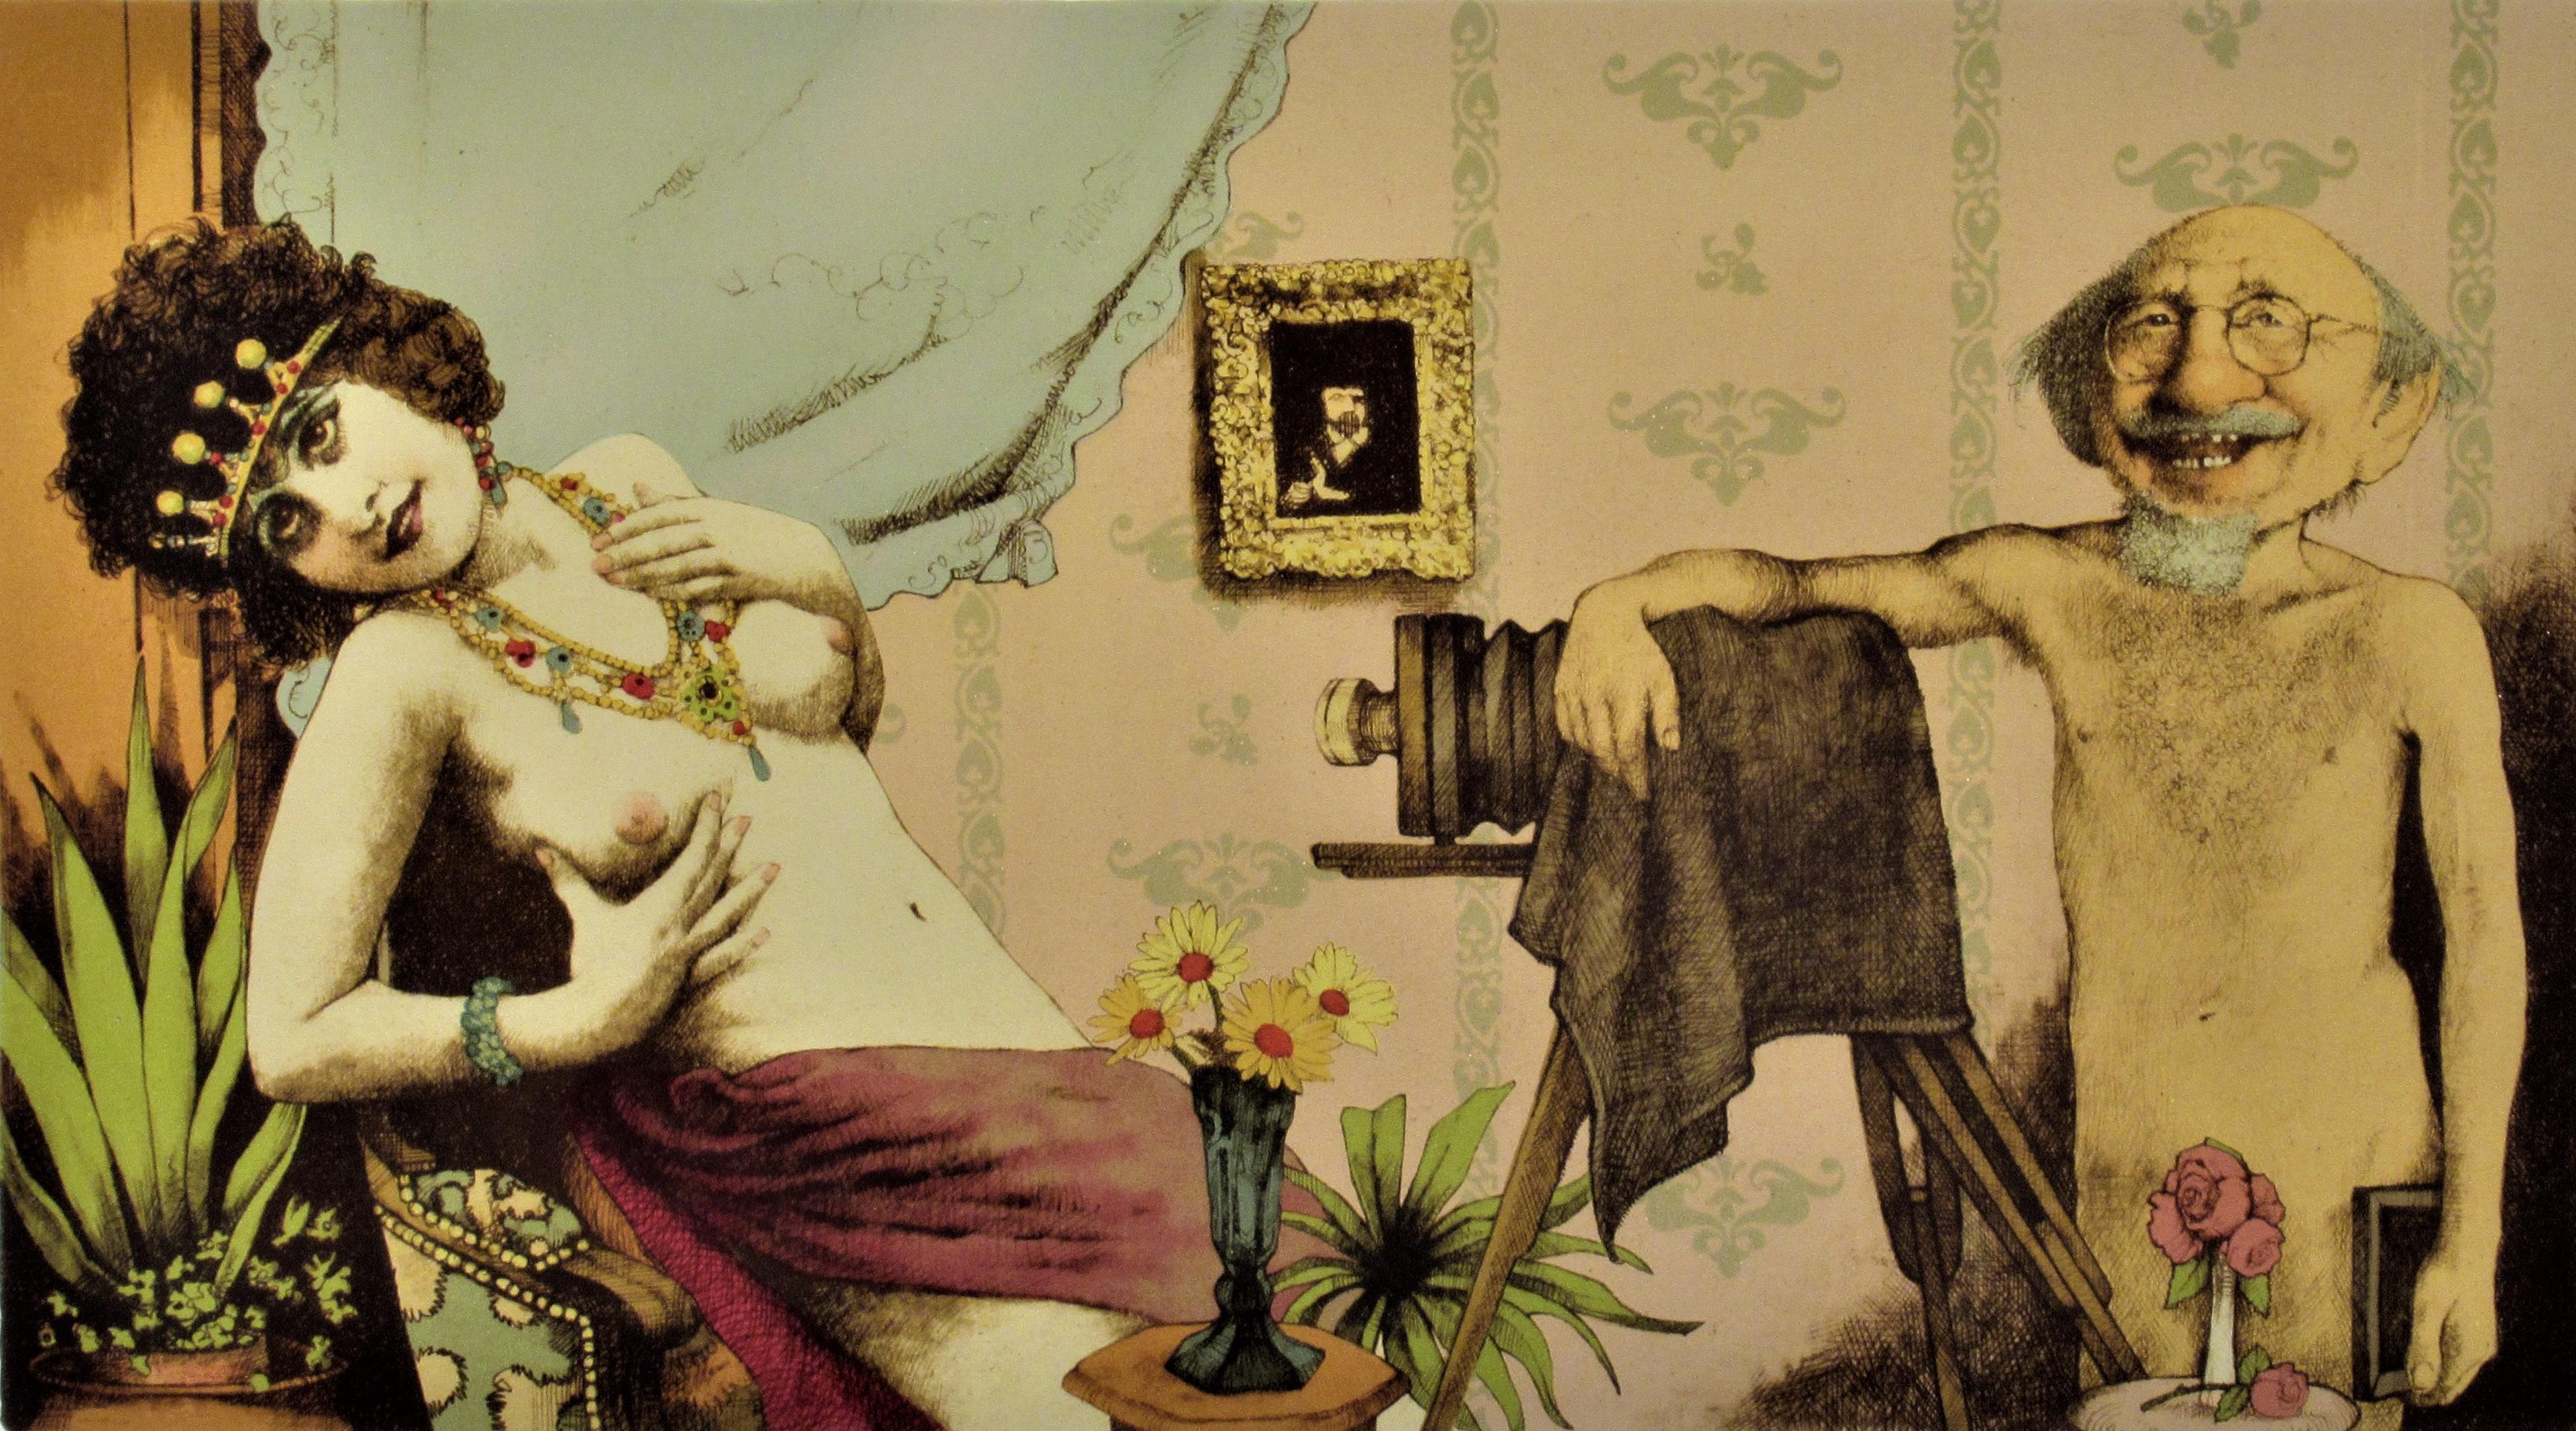 The Photographer - Print by Charles Bragg